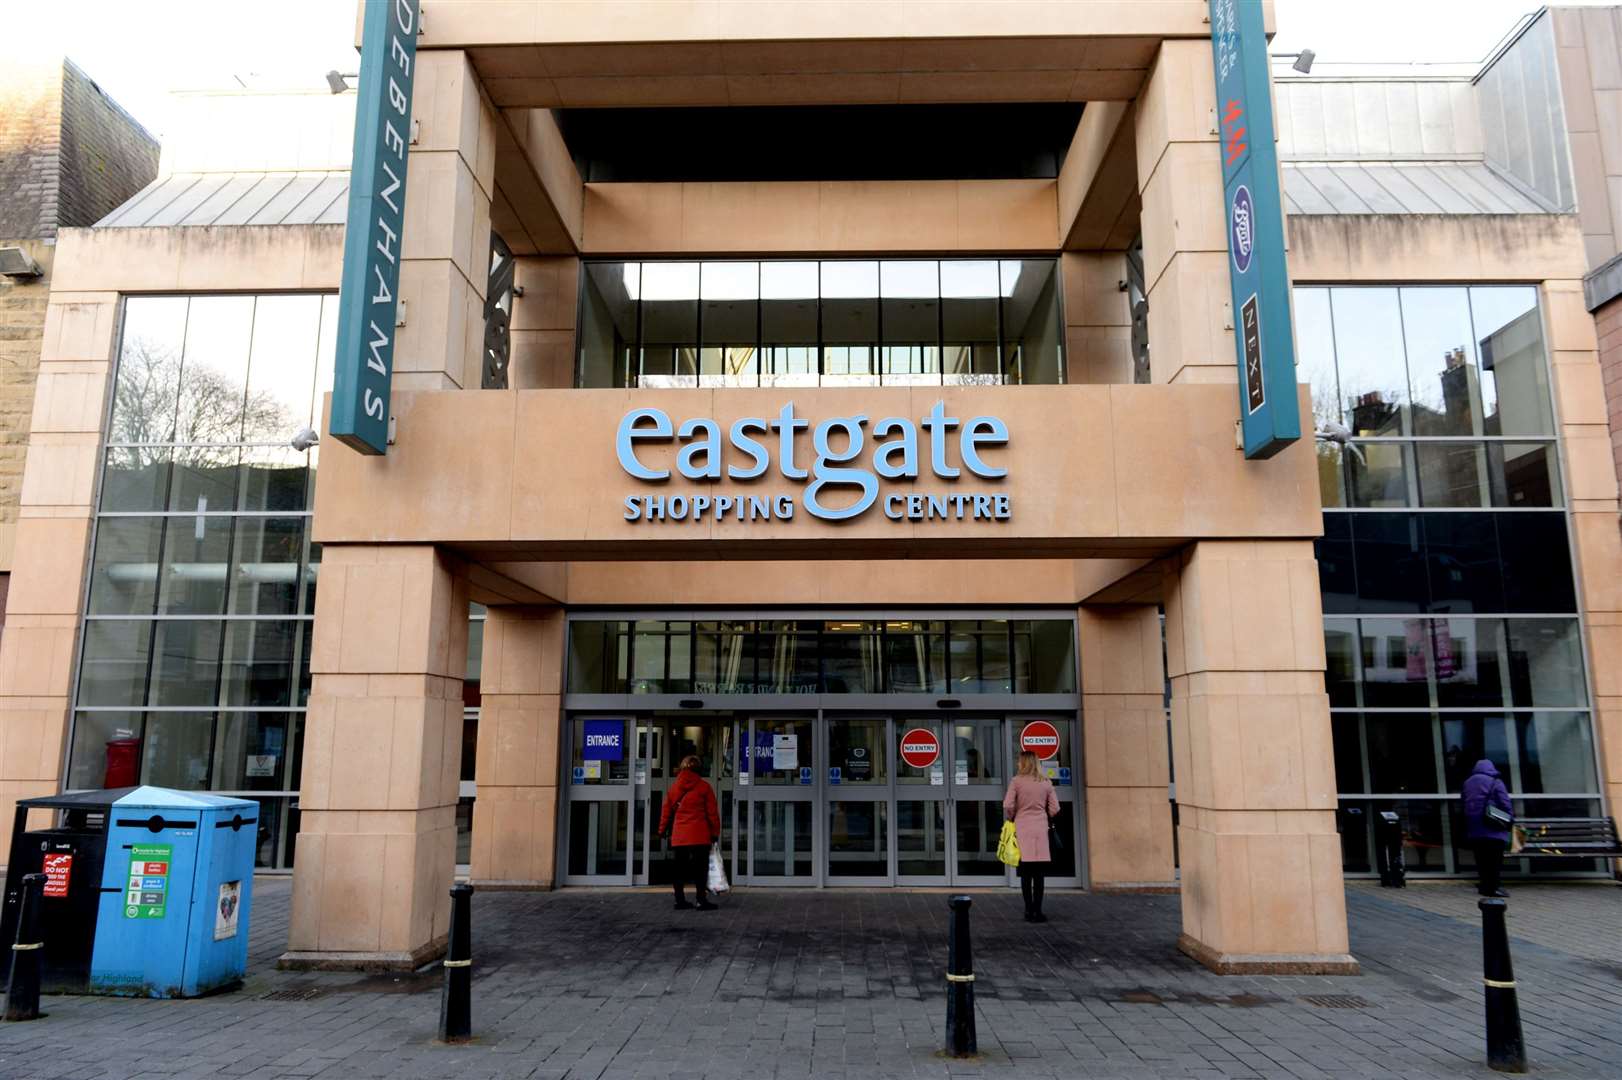 Inverness's Eastgate Shopping Centre has been dealt another blow with the loss of a further well known retailer in chocolate maker Thorntons.